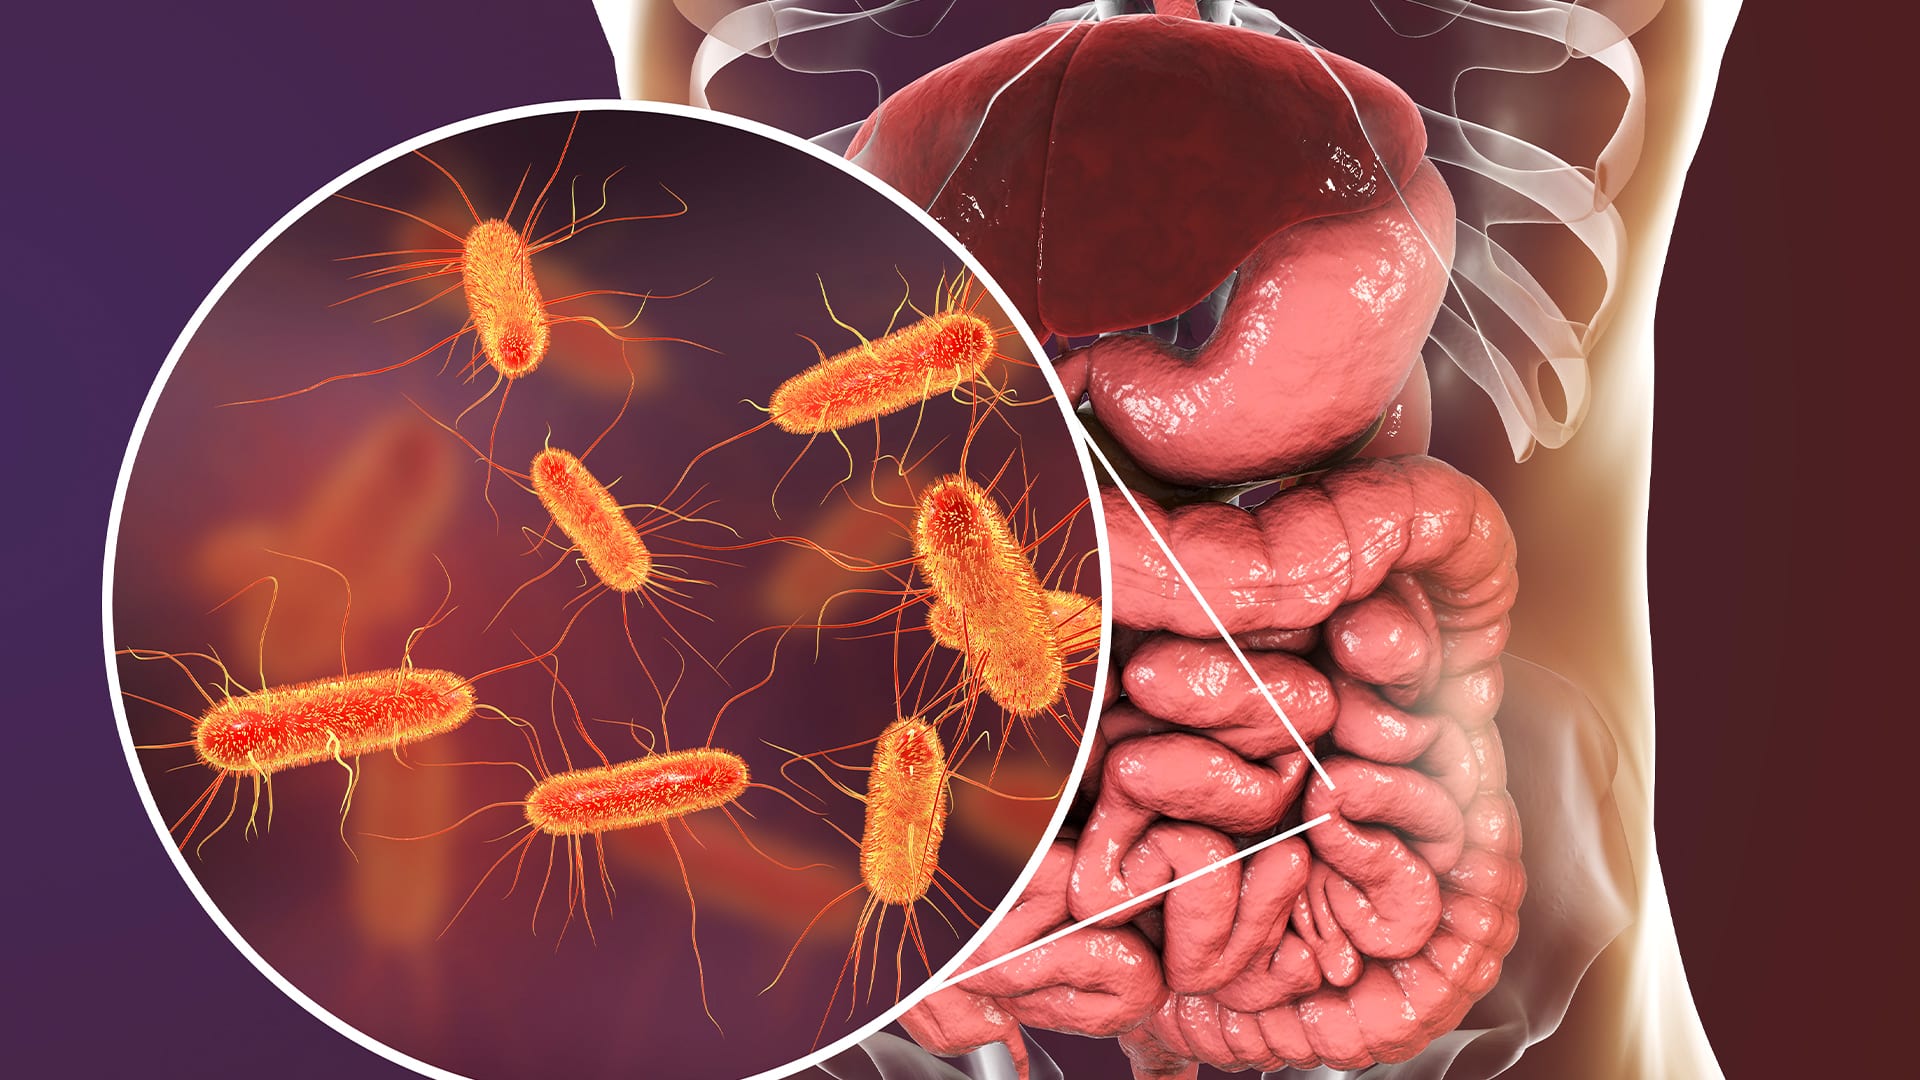 Could human gut bacterium reveal possible connection to depression